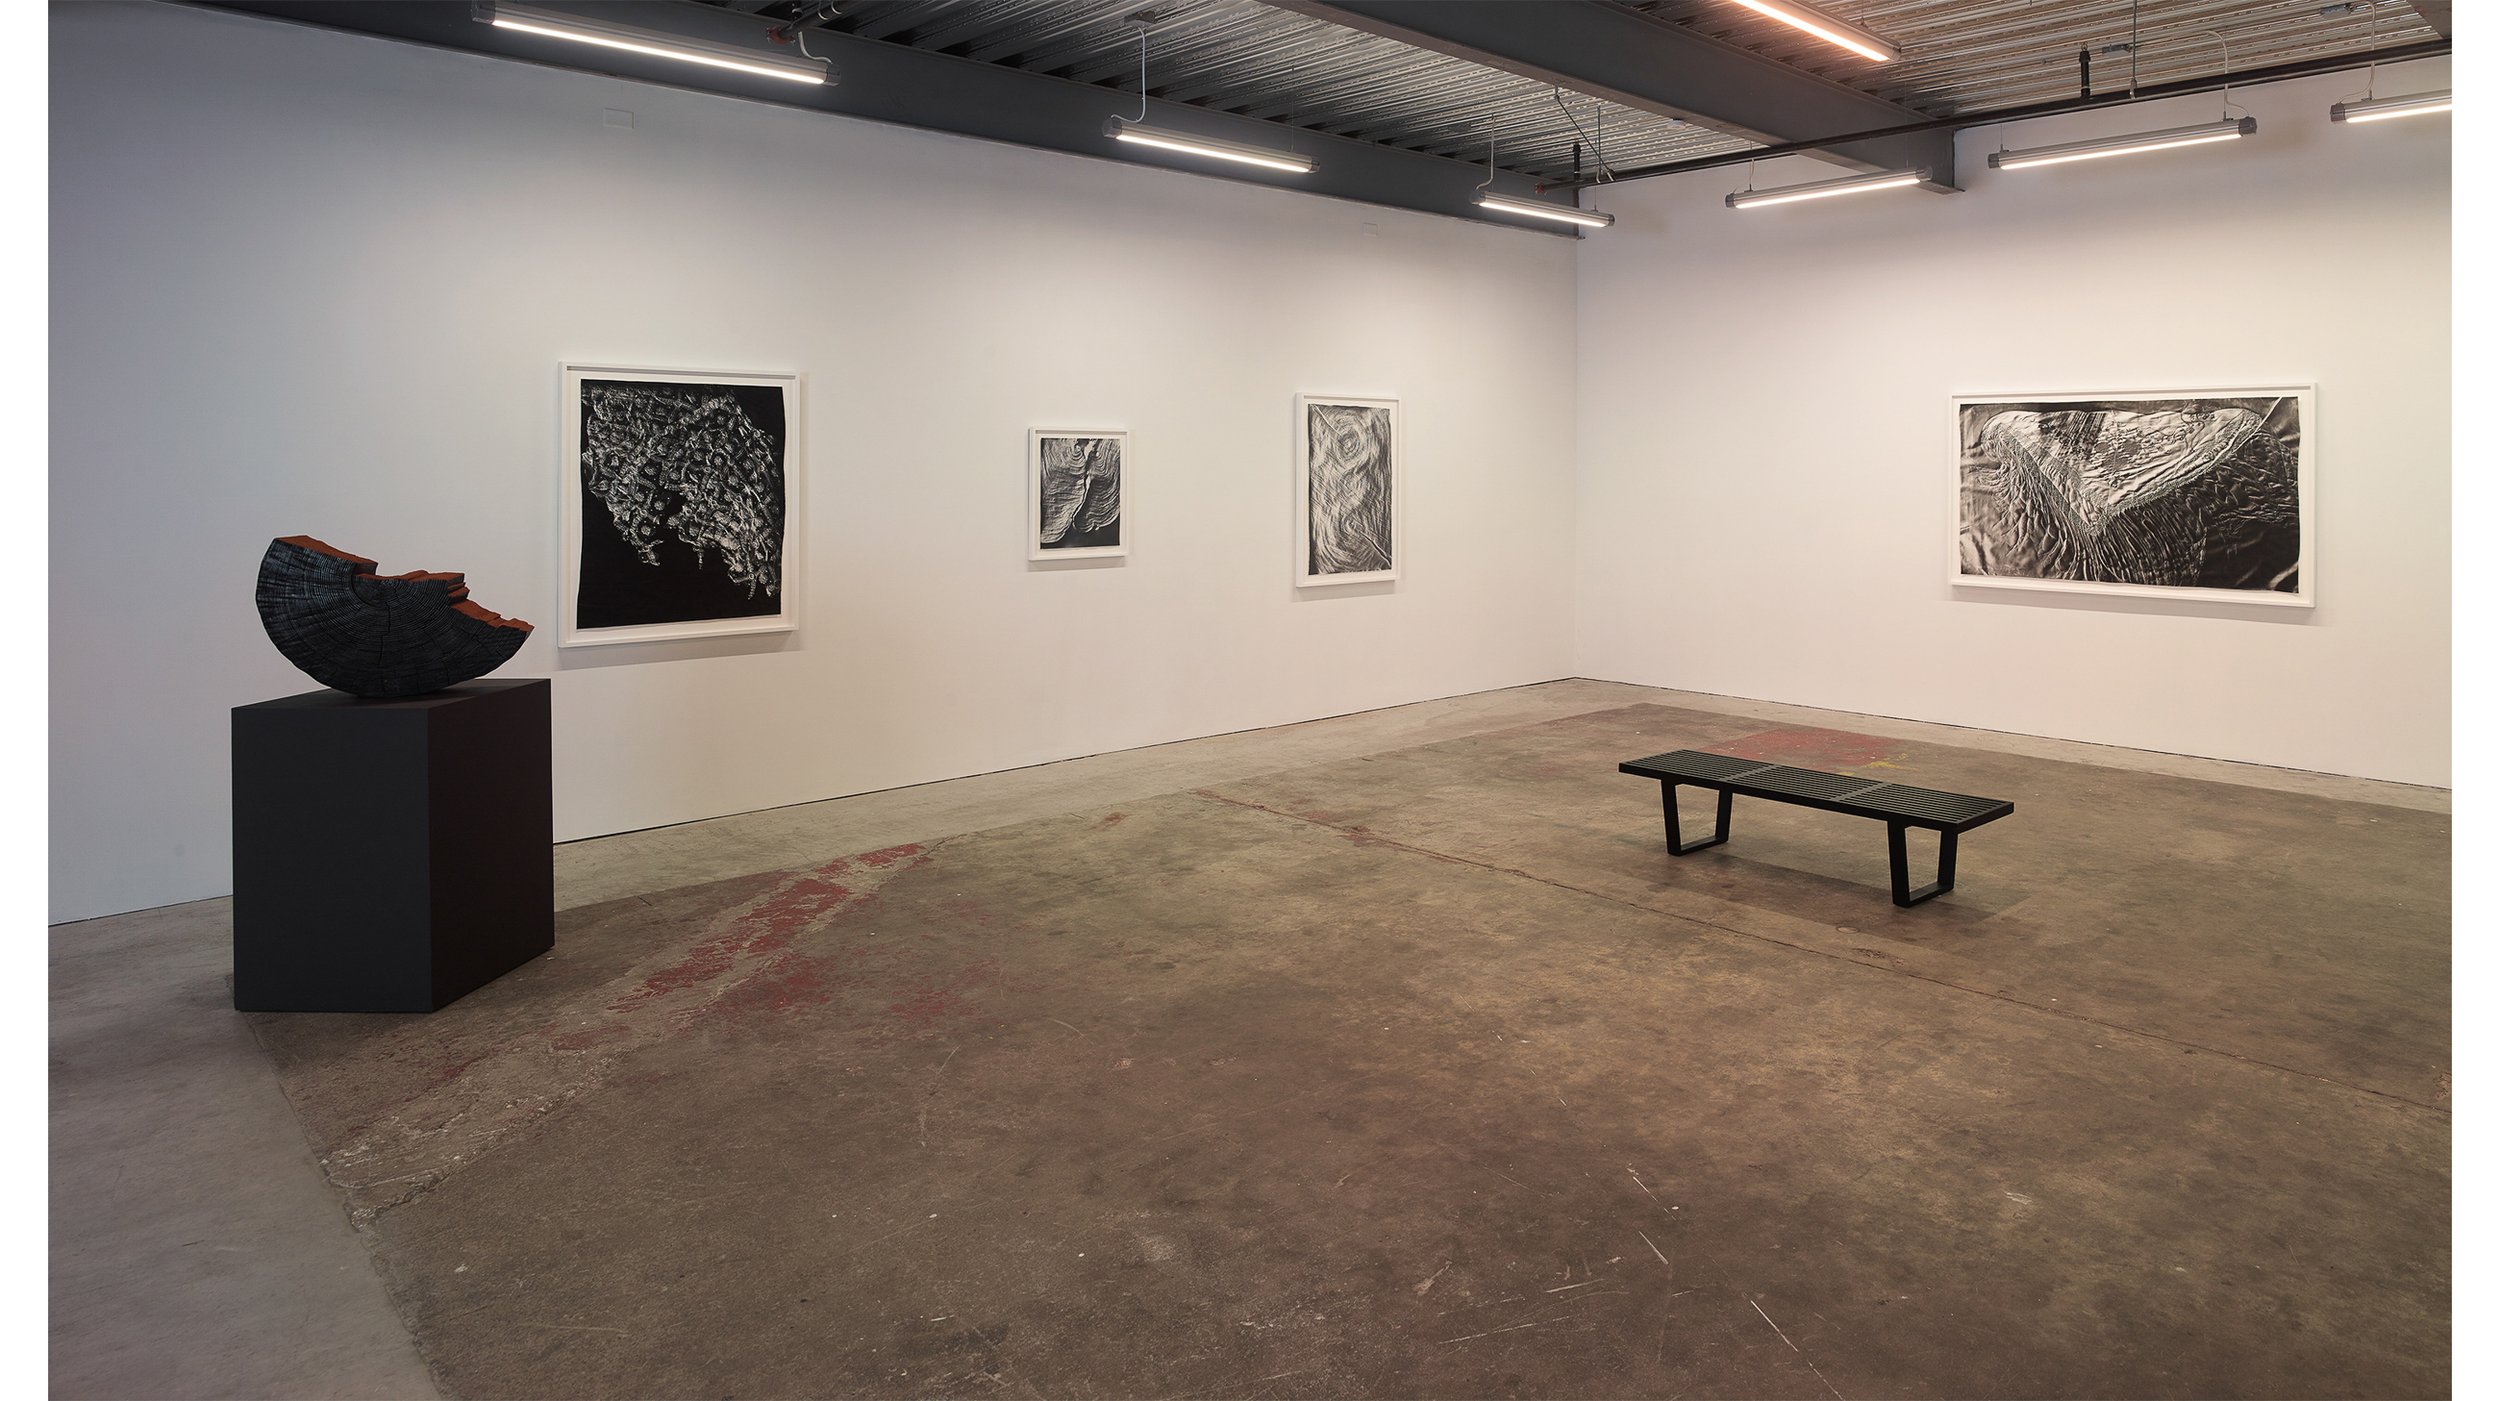  Installation view of  Witness Mark,  solo exhibition at EUQINOM Gallery, 2017 